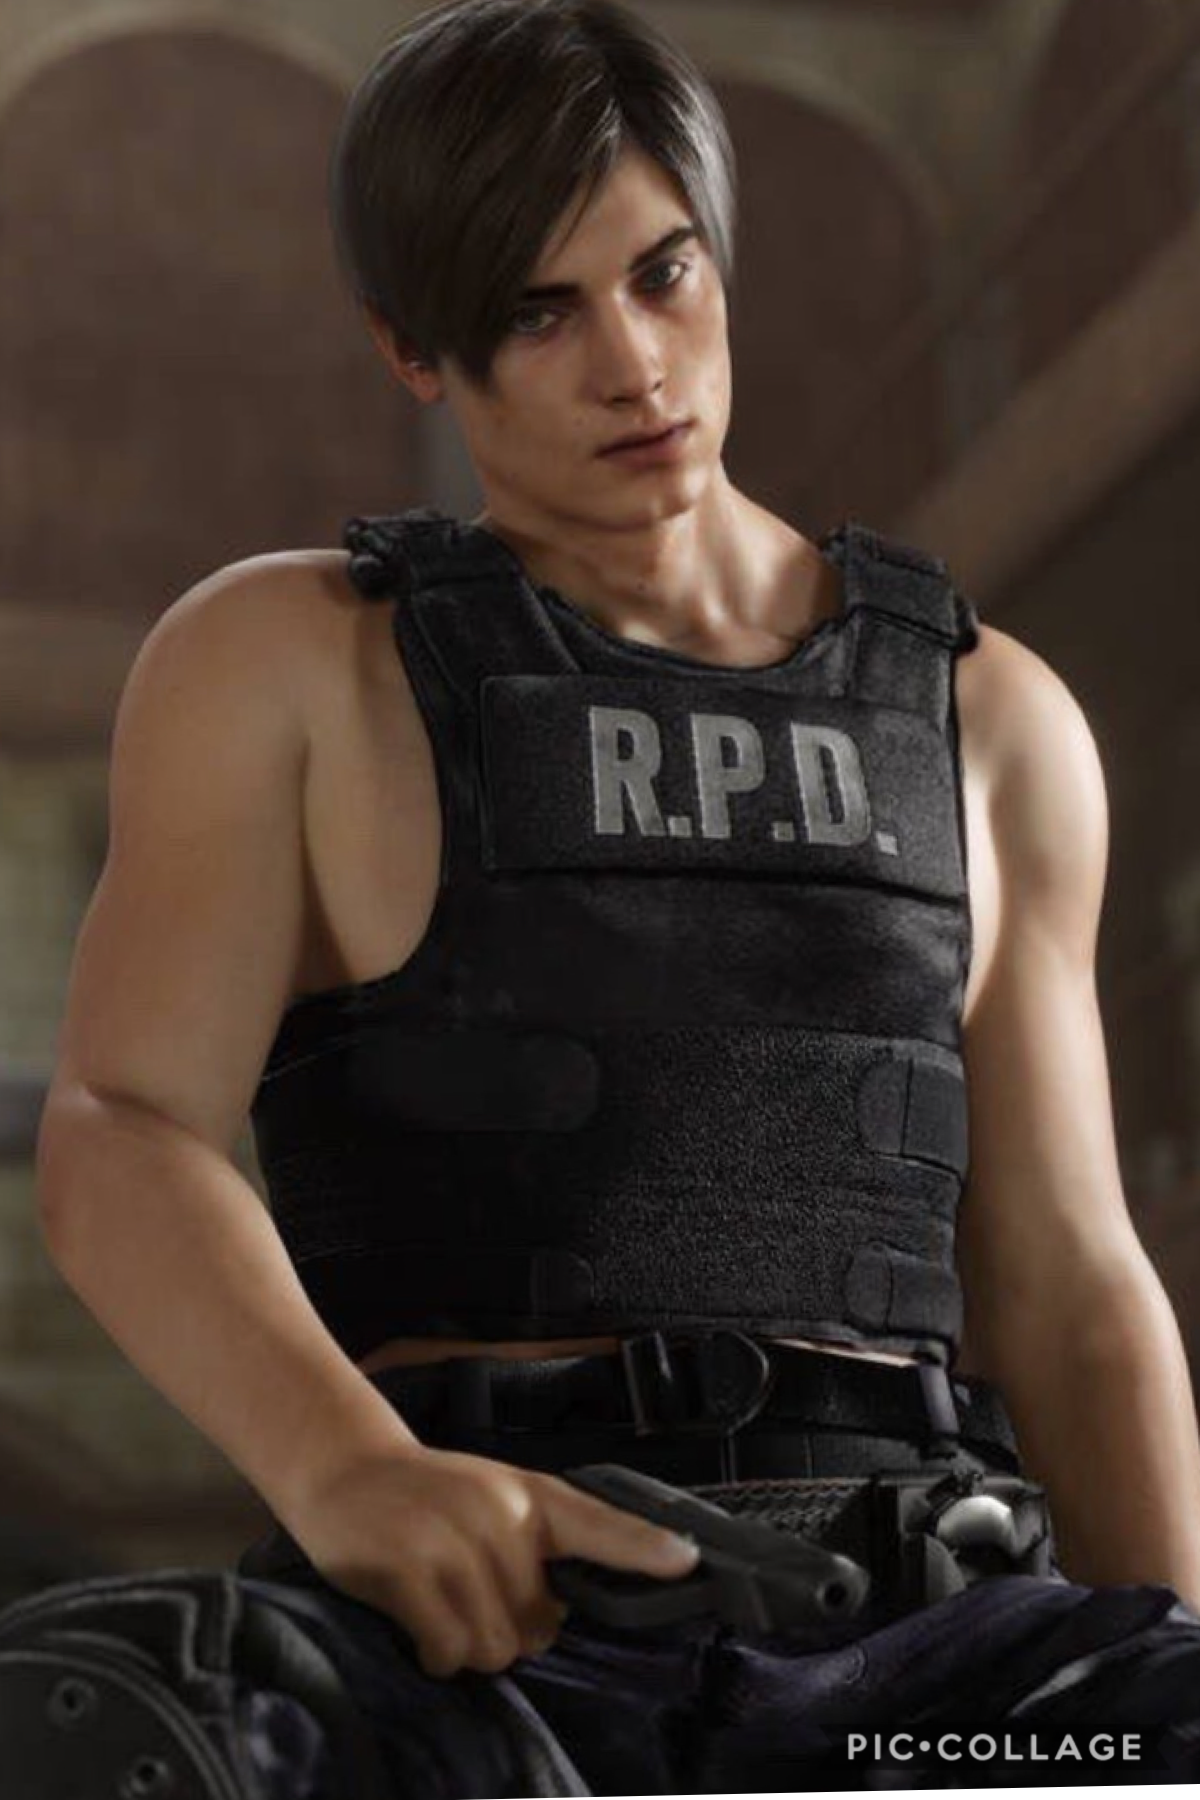 me playing resident evil just bc of this one twink? it’s more likely than u think